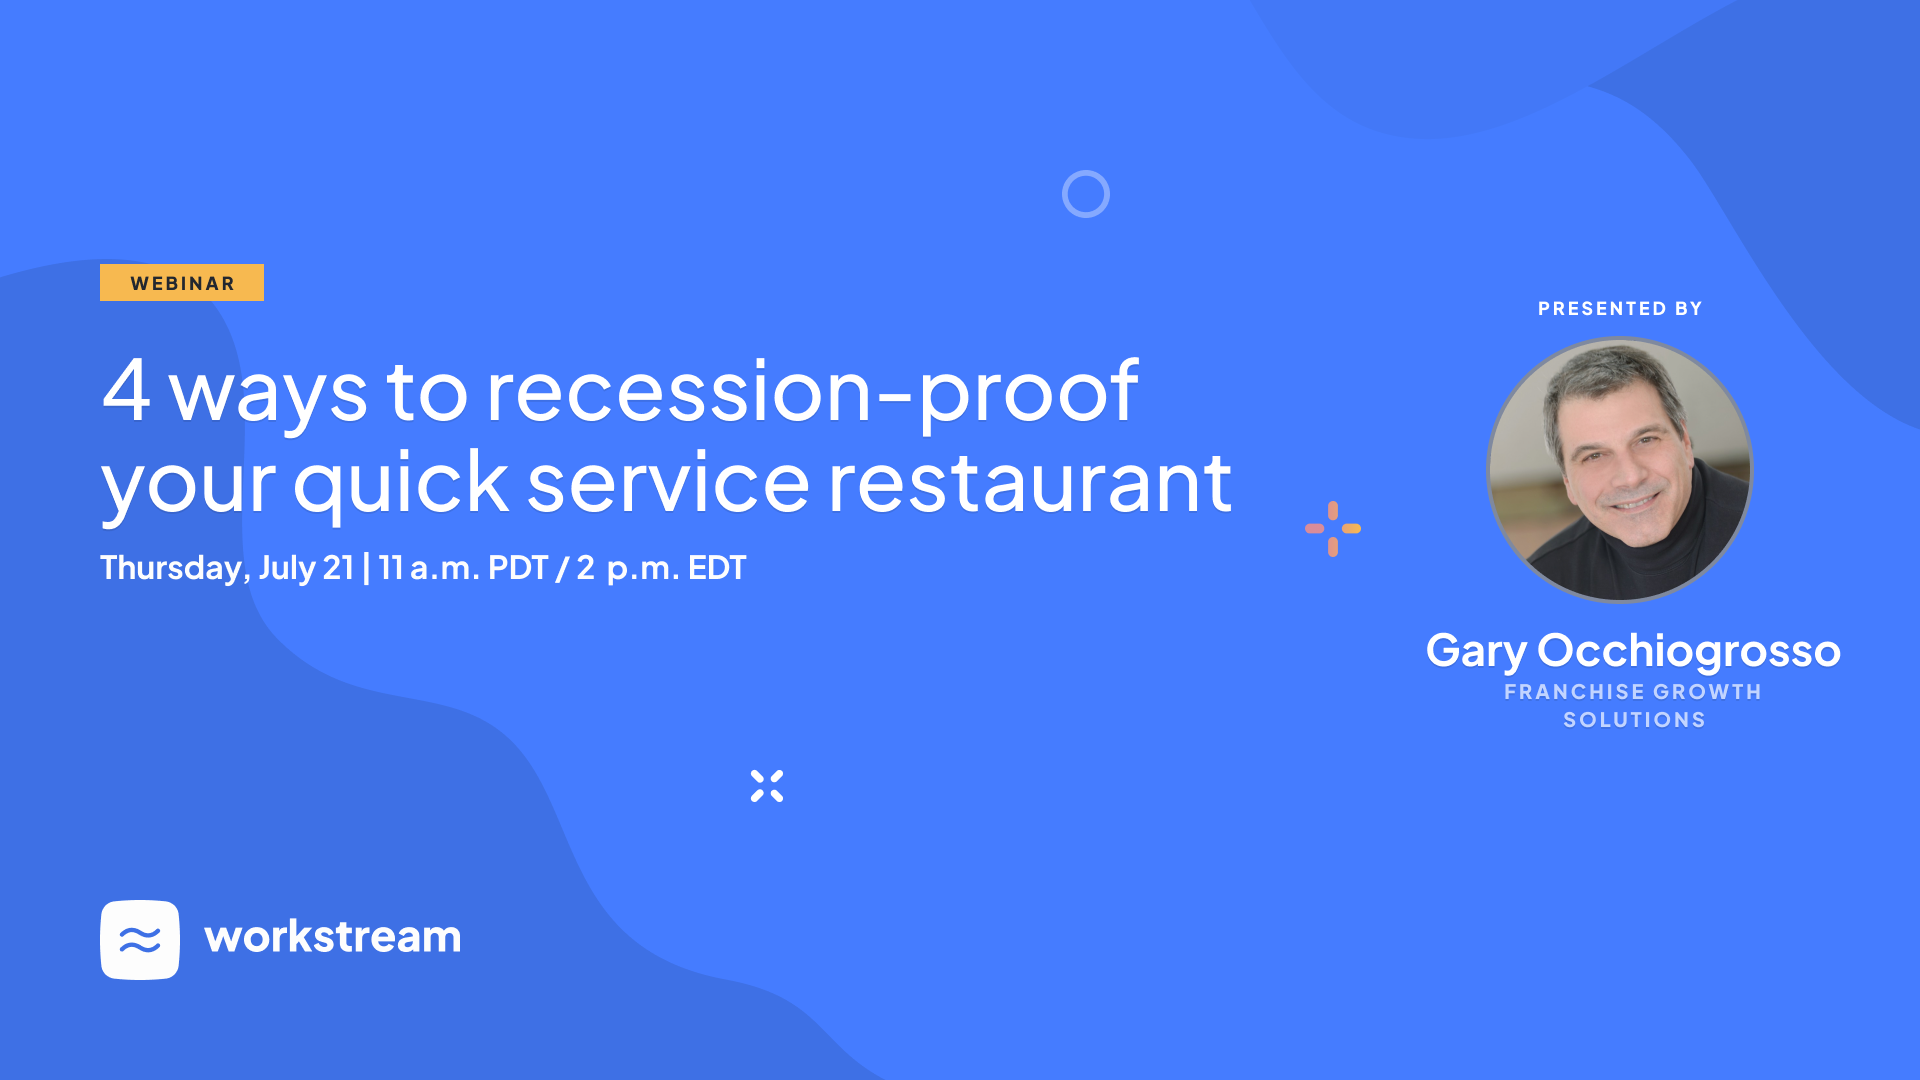 4 ways to recession-proof your quick service restaurant